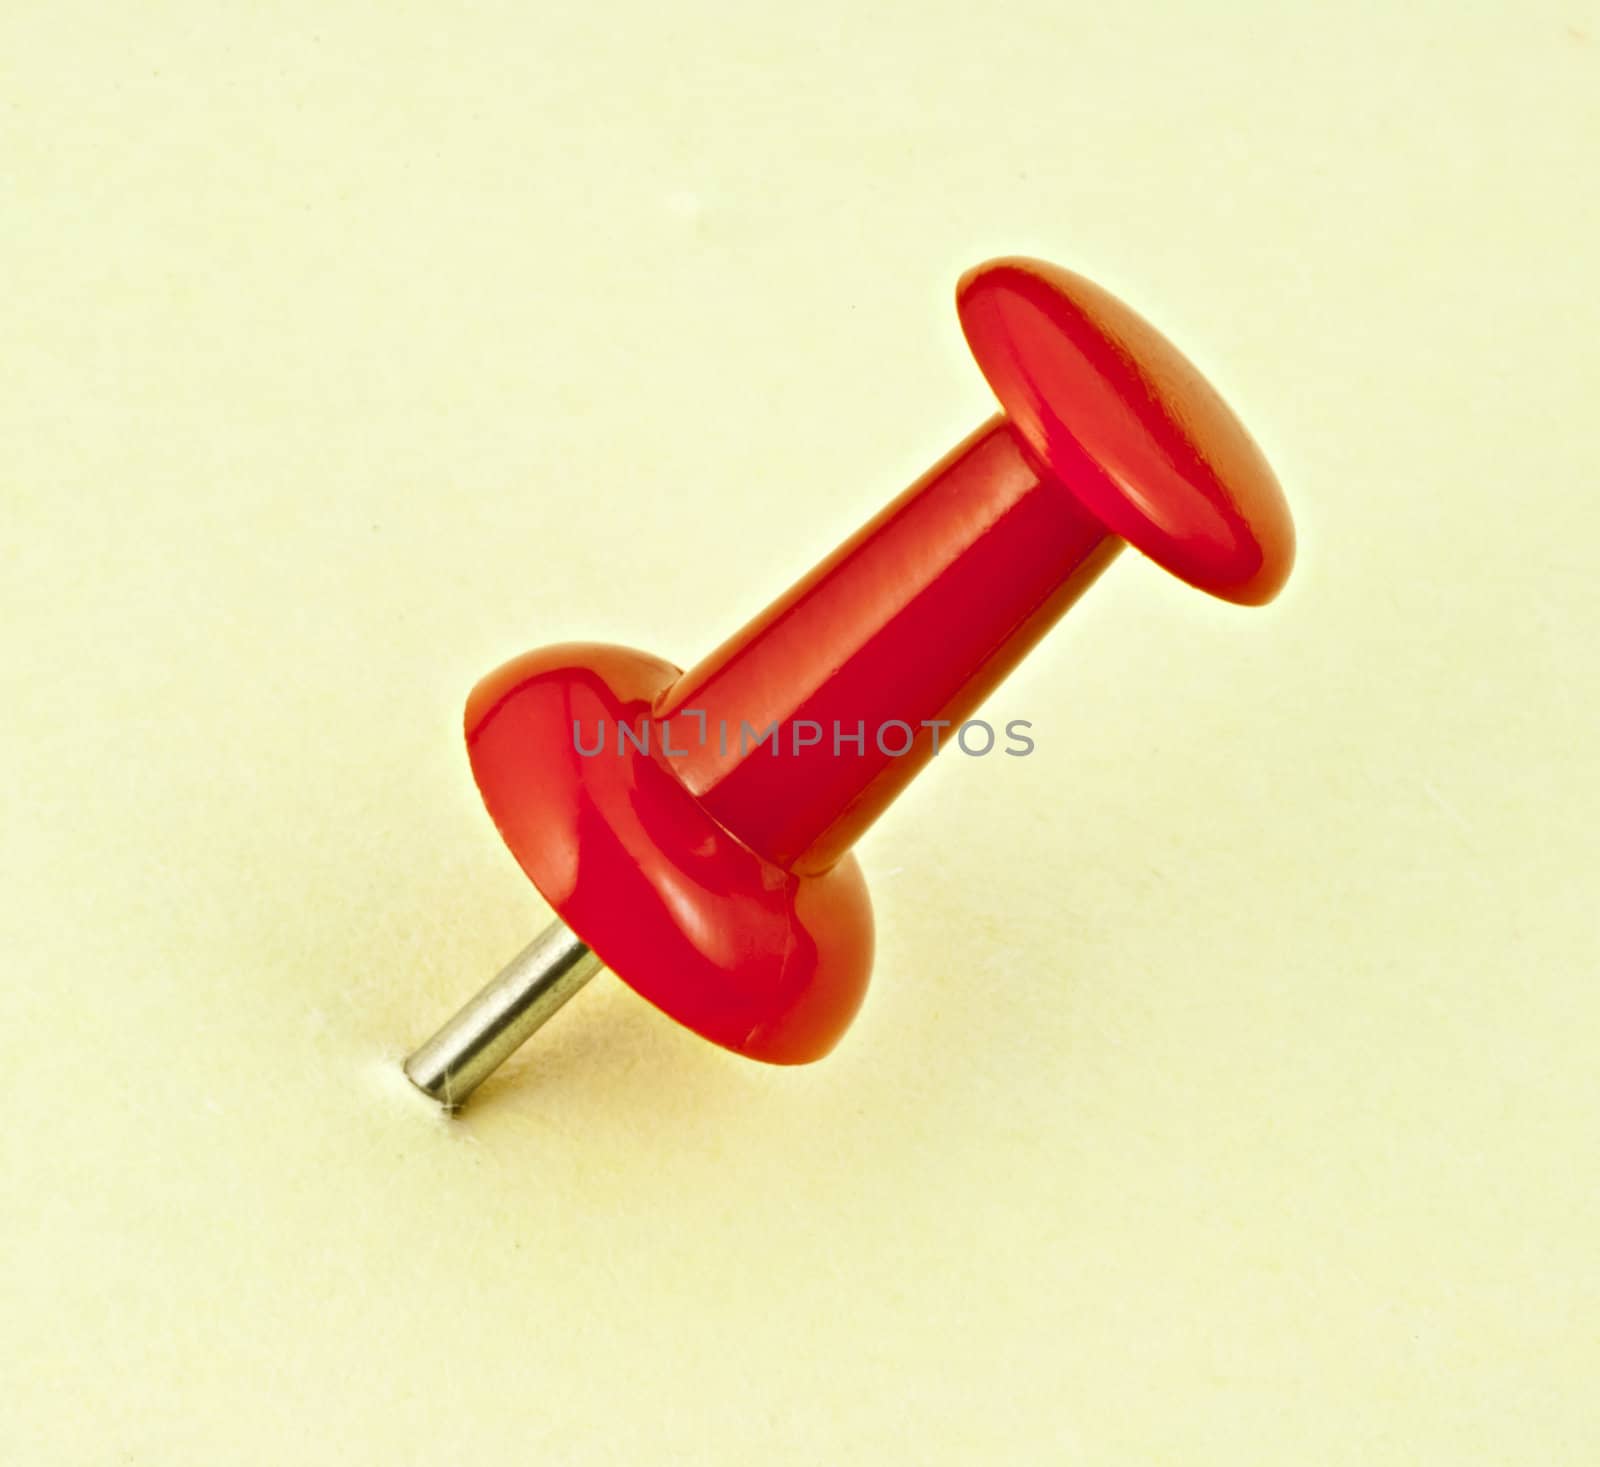 A red pin on the yellow background, macro photography.
